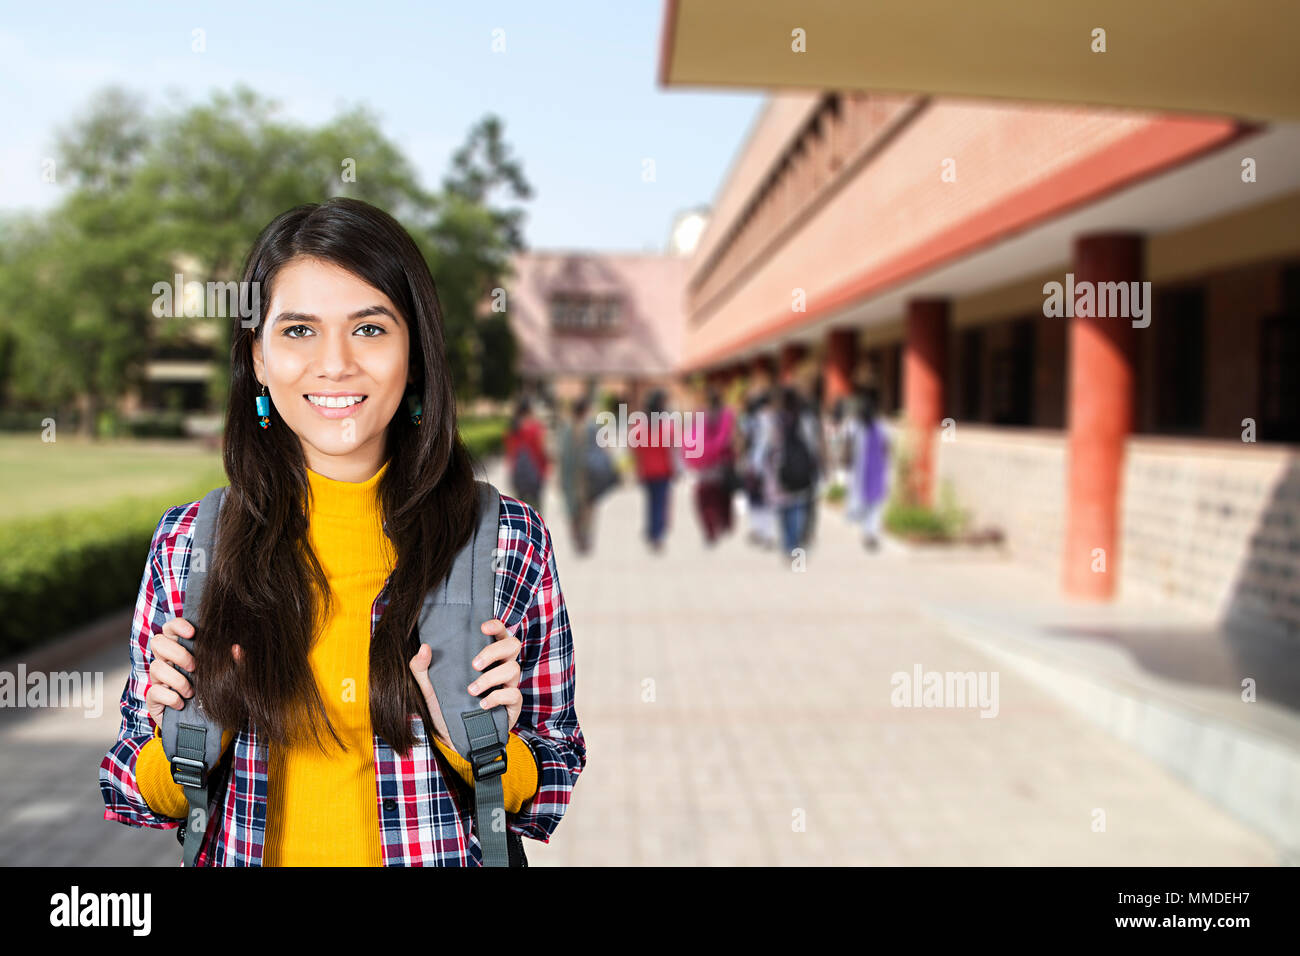 One Young Woman College Student Carrying Bag On White Background Stock Photo